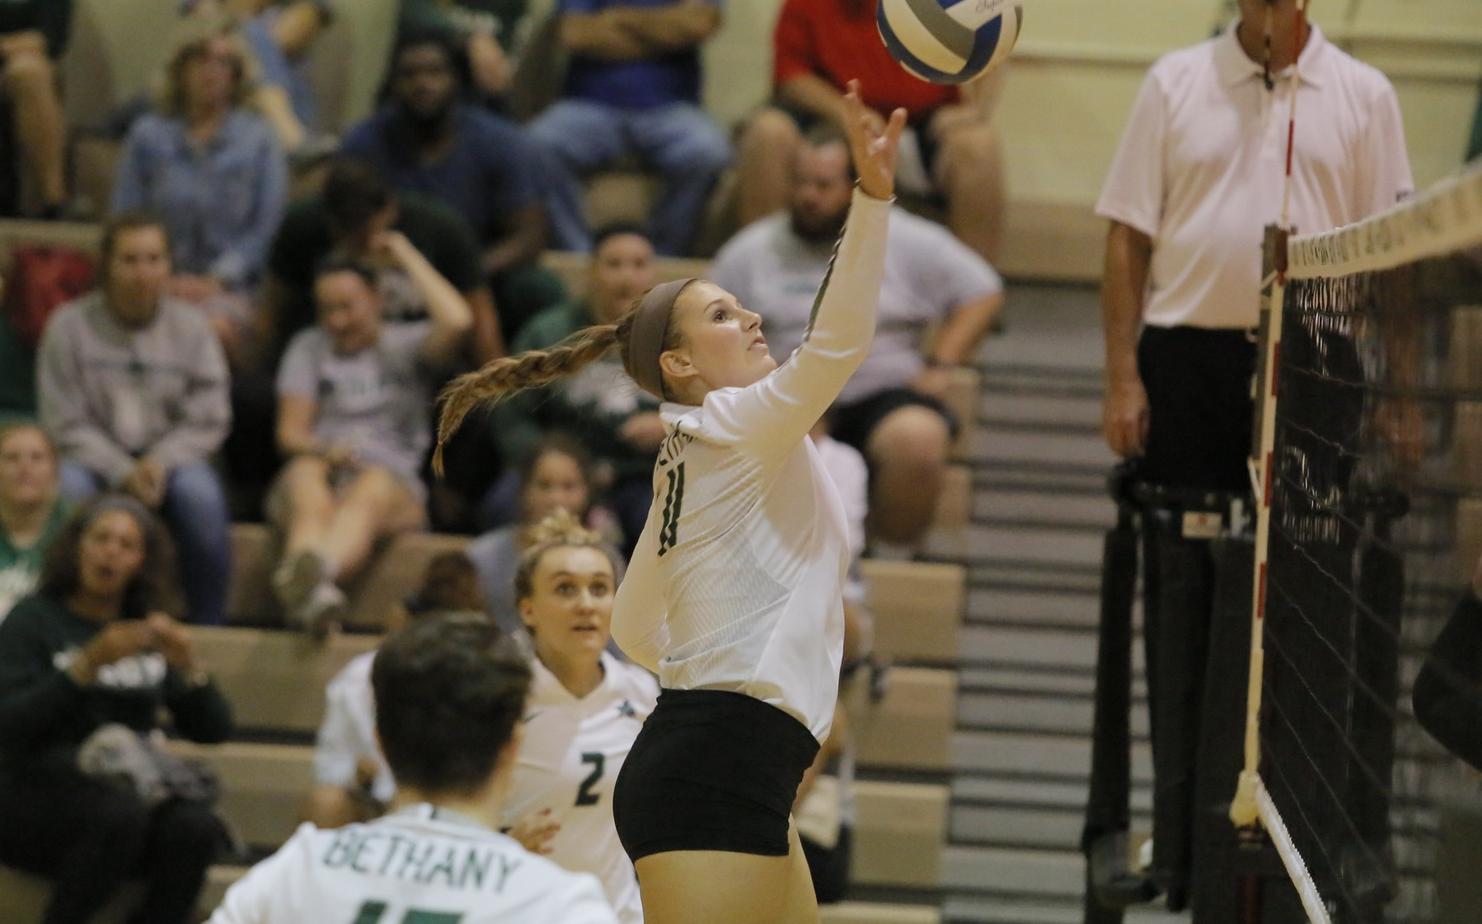 Bethany falls in five to Chatham, 3-2